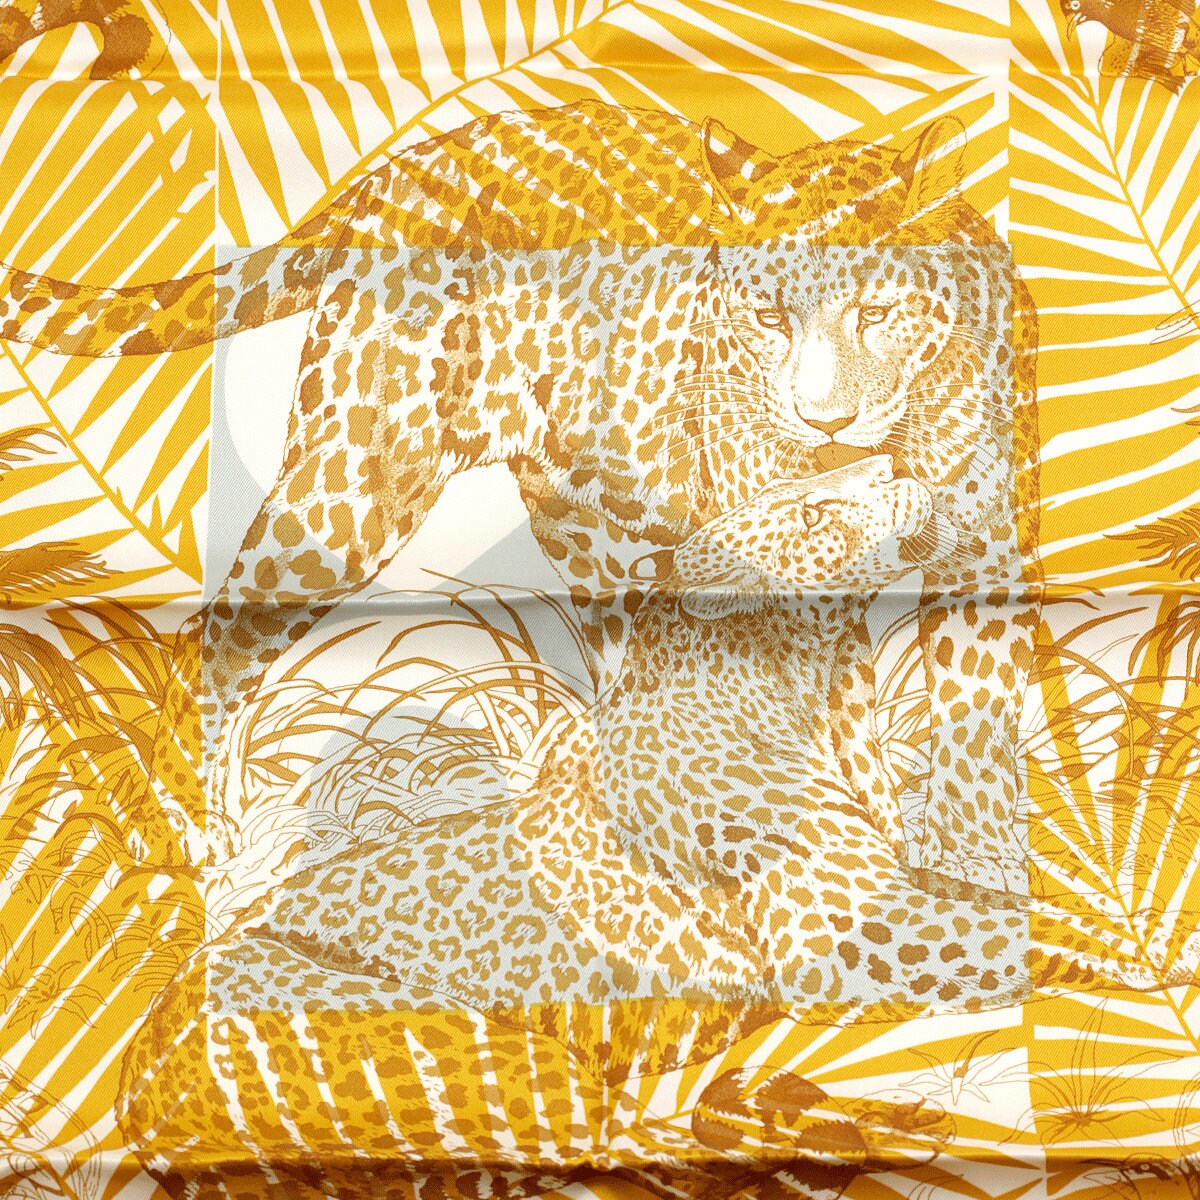 Hermes Scarf "Jungle Love au Tampon" by Robert Dallet and Giancarlo Pagni 70cm Silk | Foulard Carre